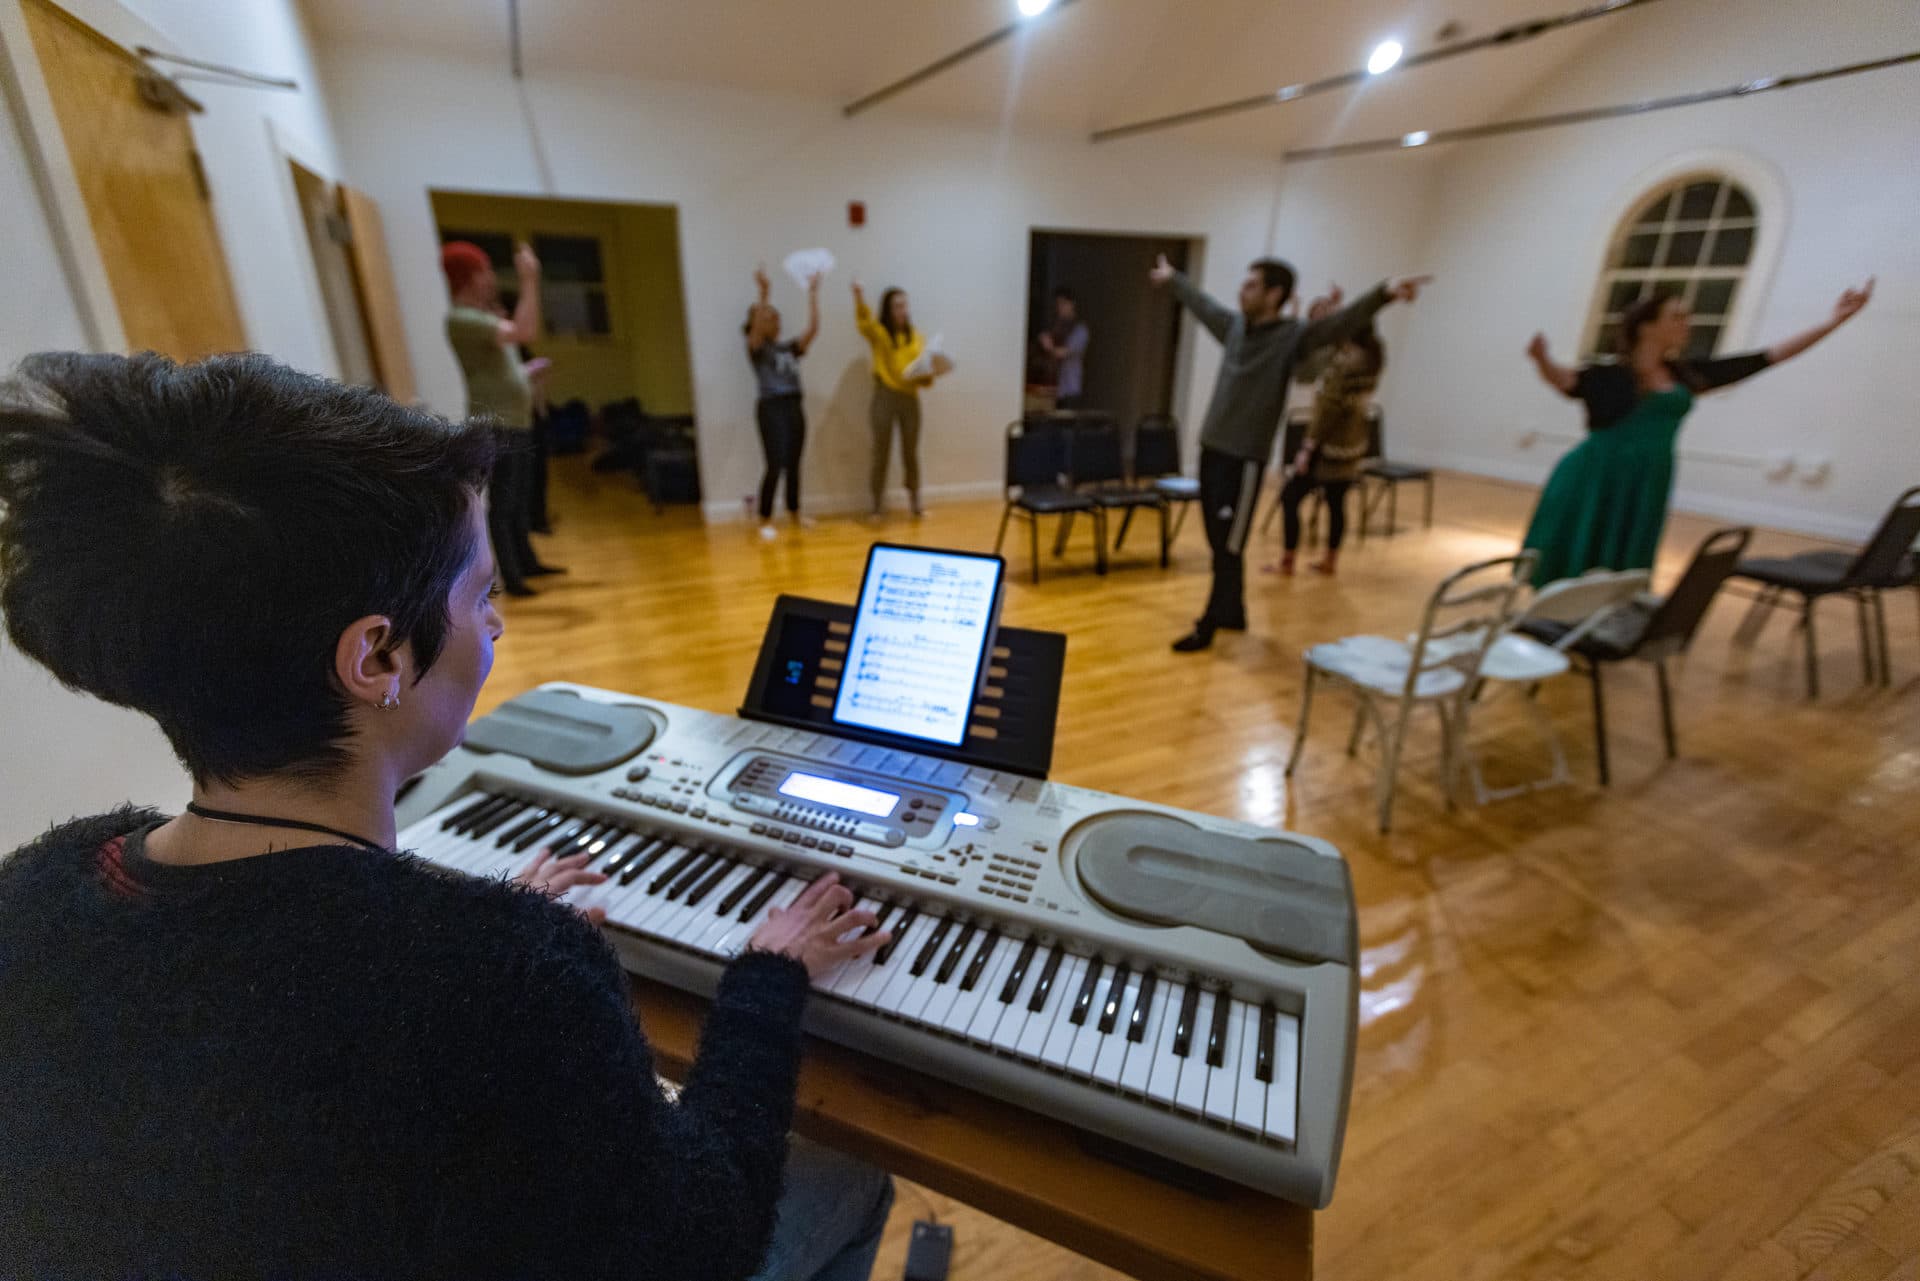 Composer Melissa Carubia and the cast of “T: An MBTA Musical” rehearse ahead of their new season of shows beginning in March at the Rockwell in Davis Square. (Jesse Costa/WBUR)